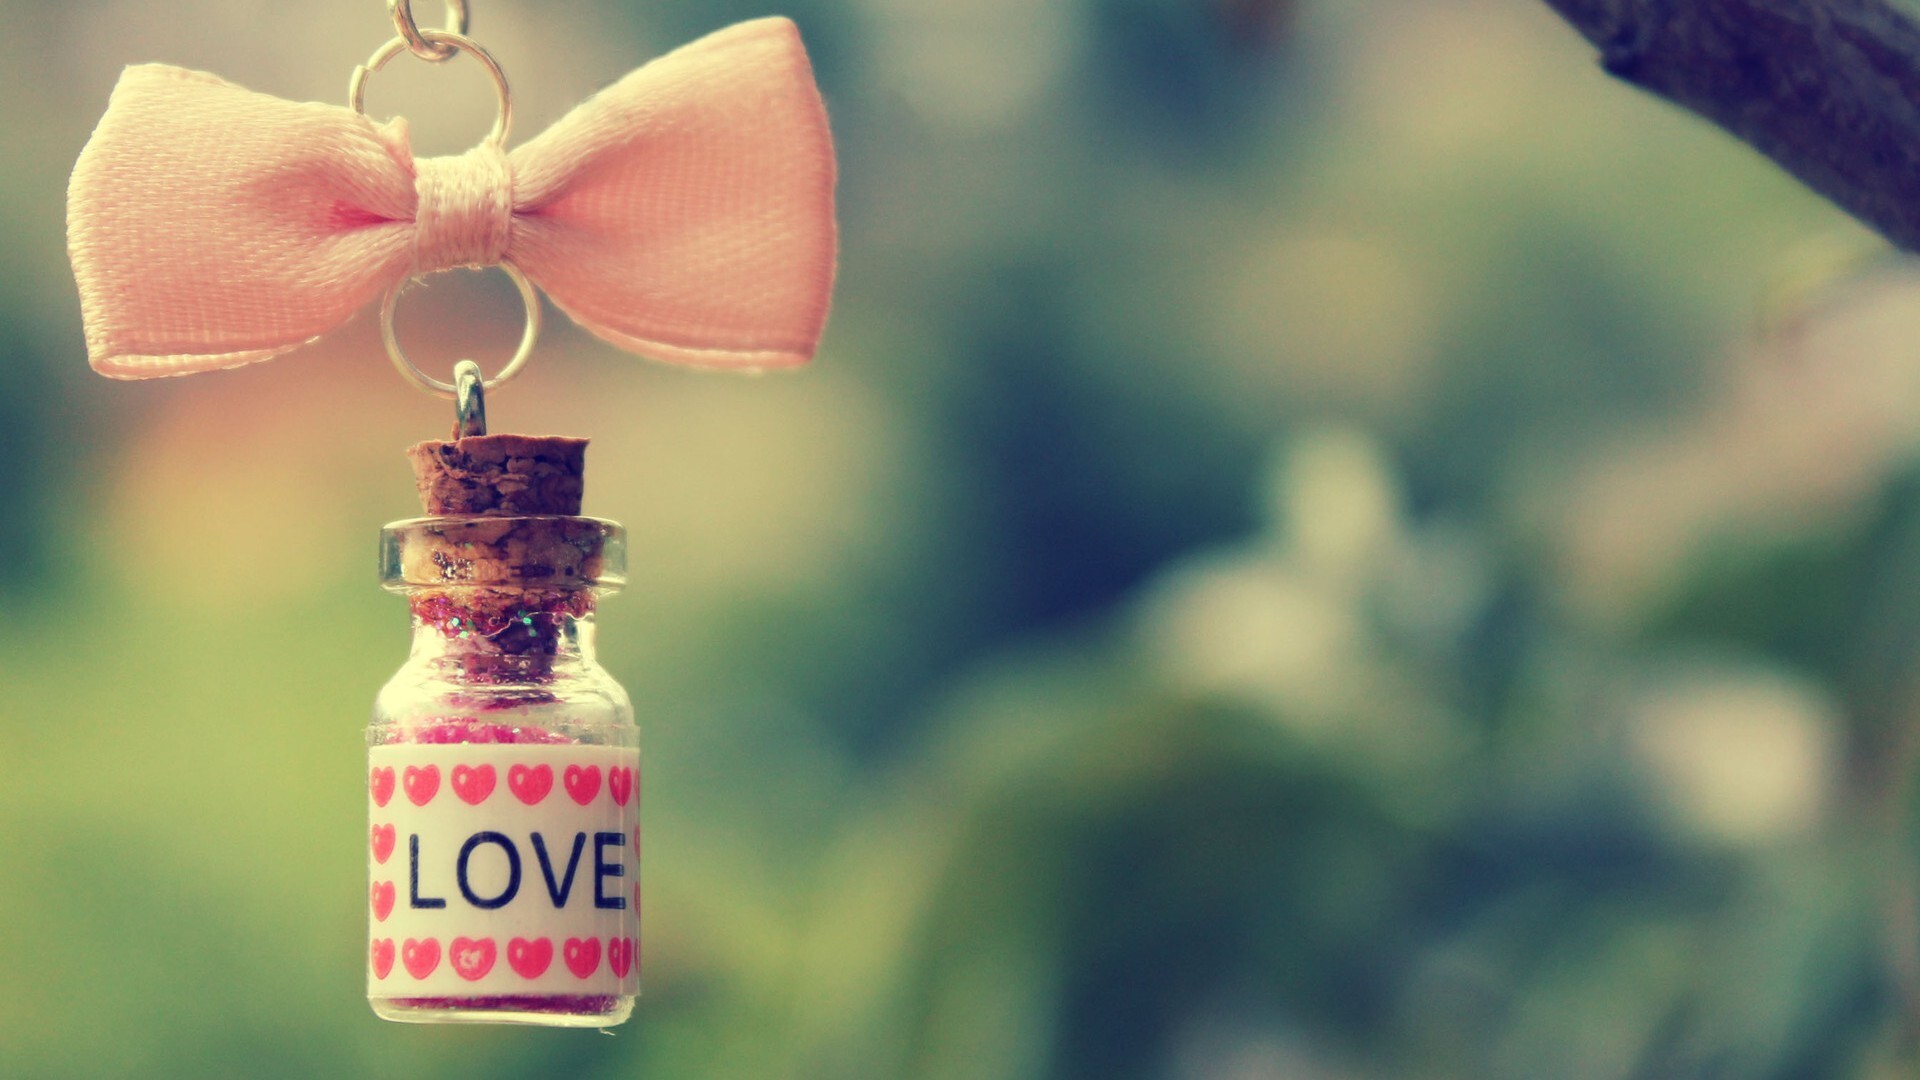 Girly: Cute custom hand-made keychain, A small glass bottle with bow tie. 1920x1080 Full HD Background.